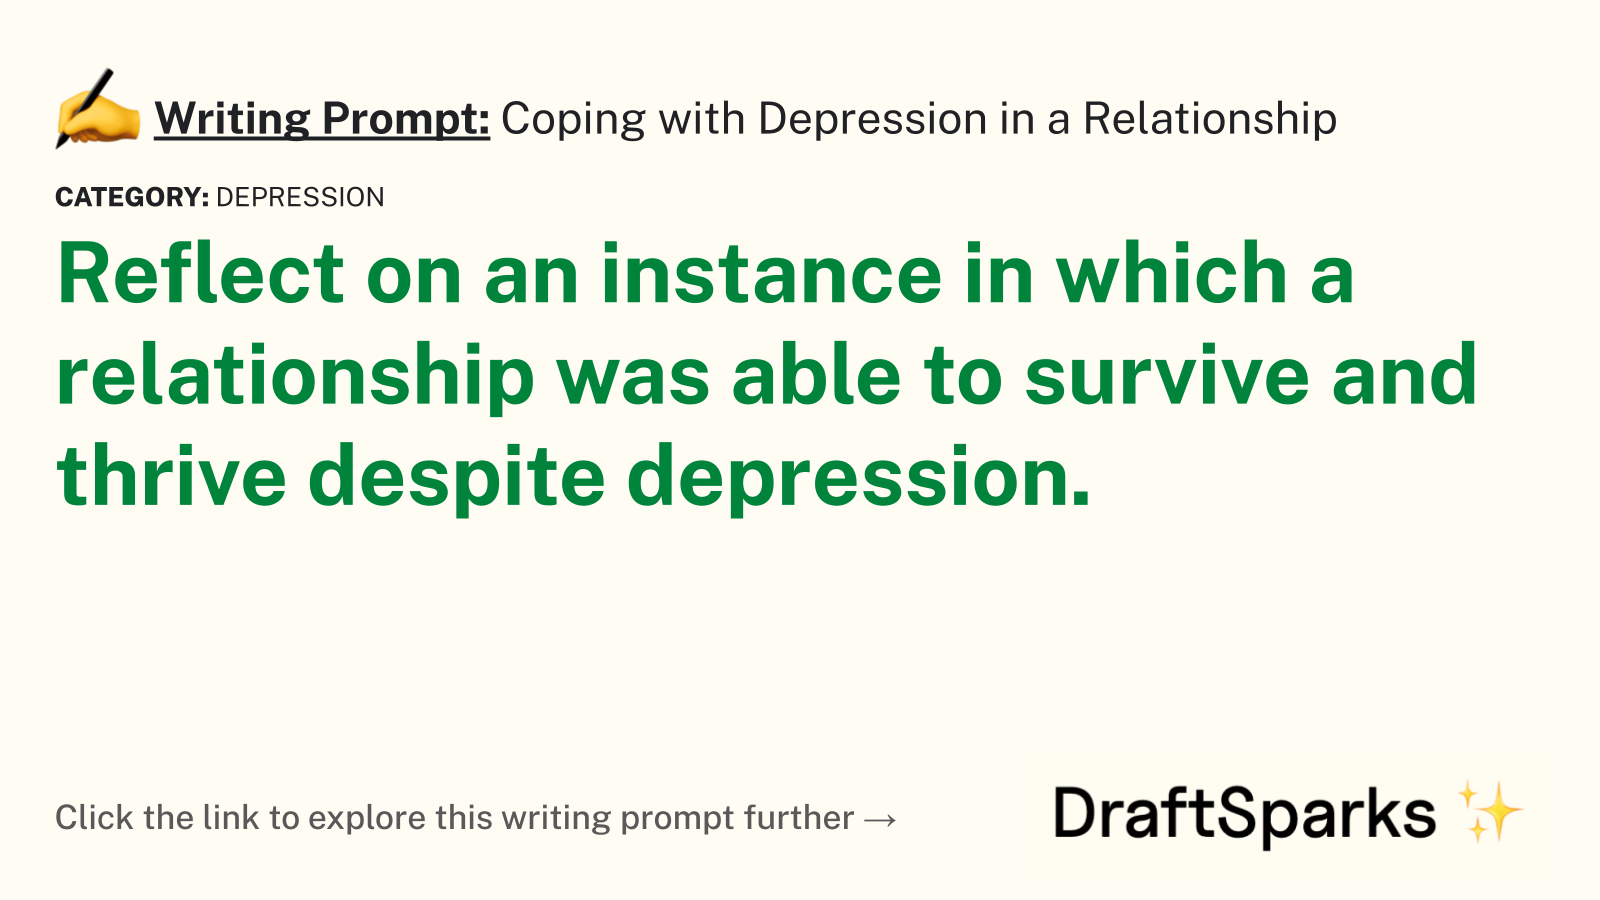 Coping with Depression in a Relationship